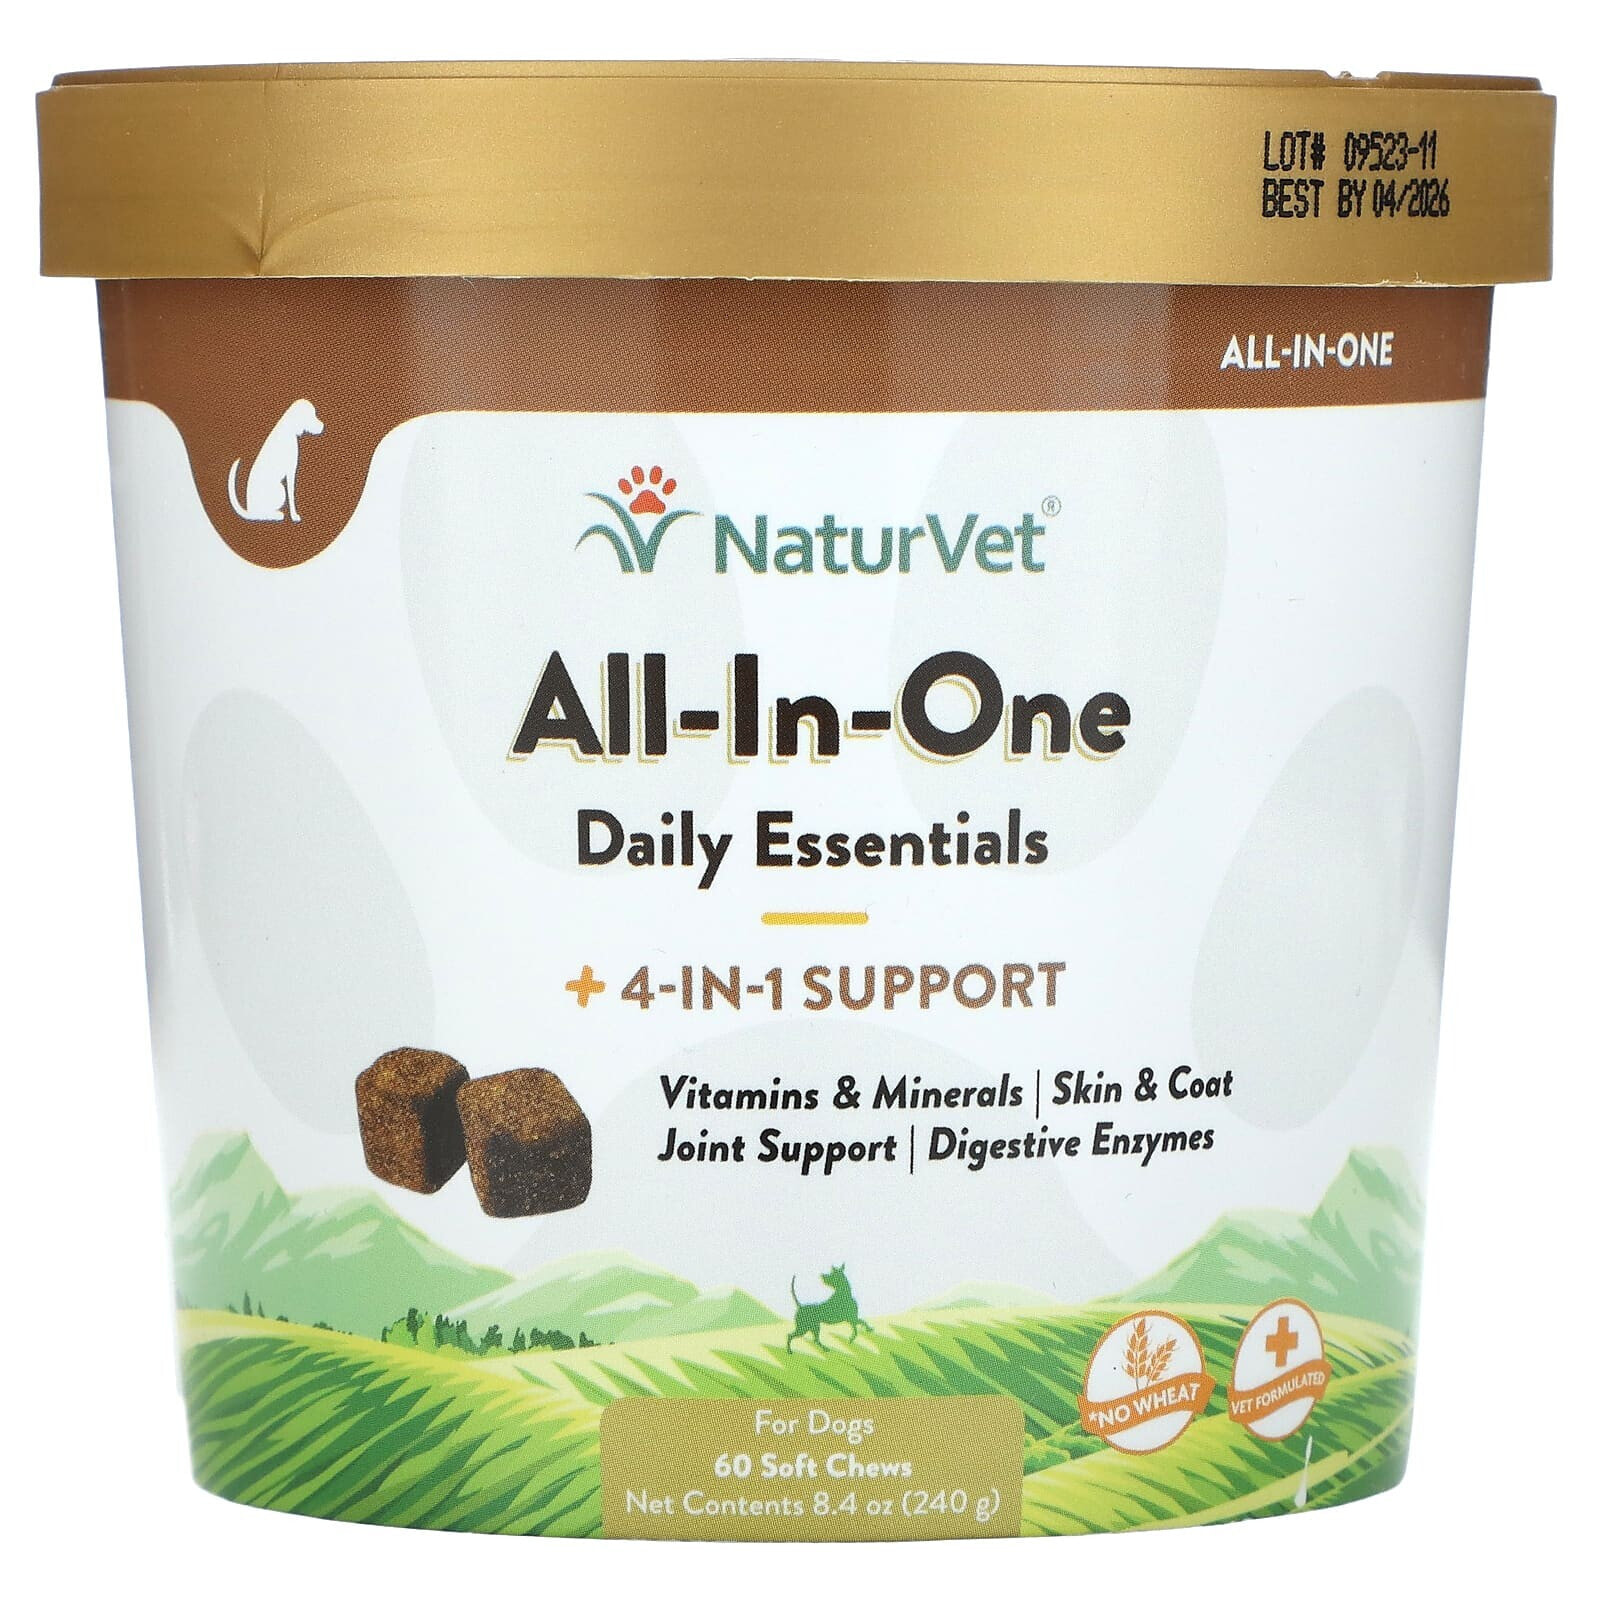 All-In-One Daily Essentials + 4-In-1 Support, For Dogs, 120 Soft Chews, 16.9 oz (480 g)